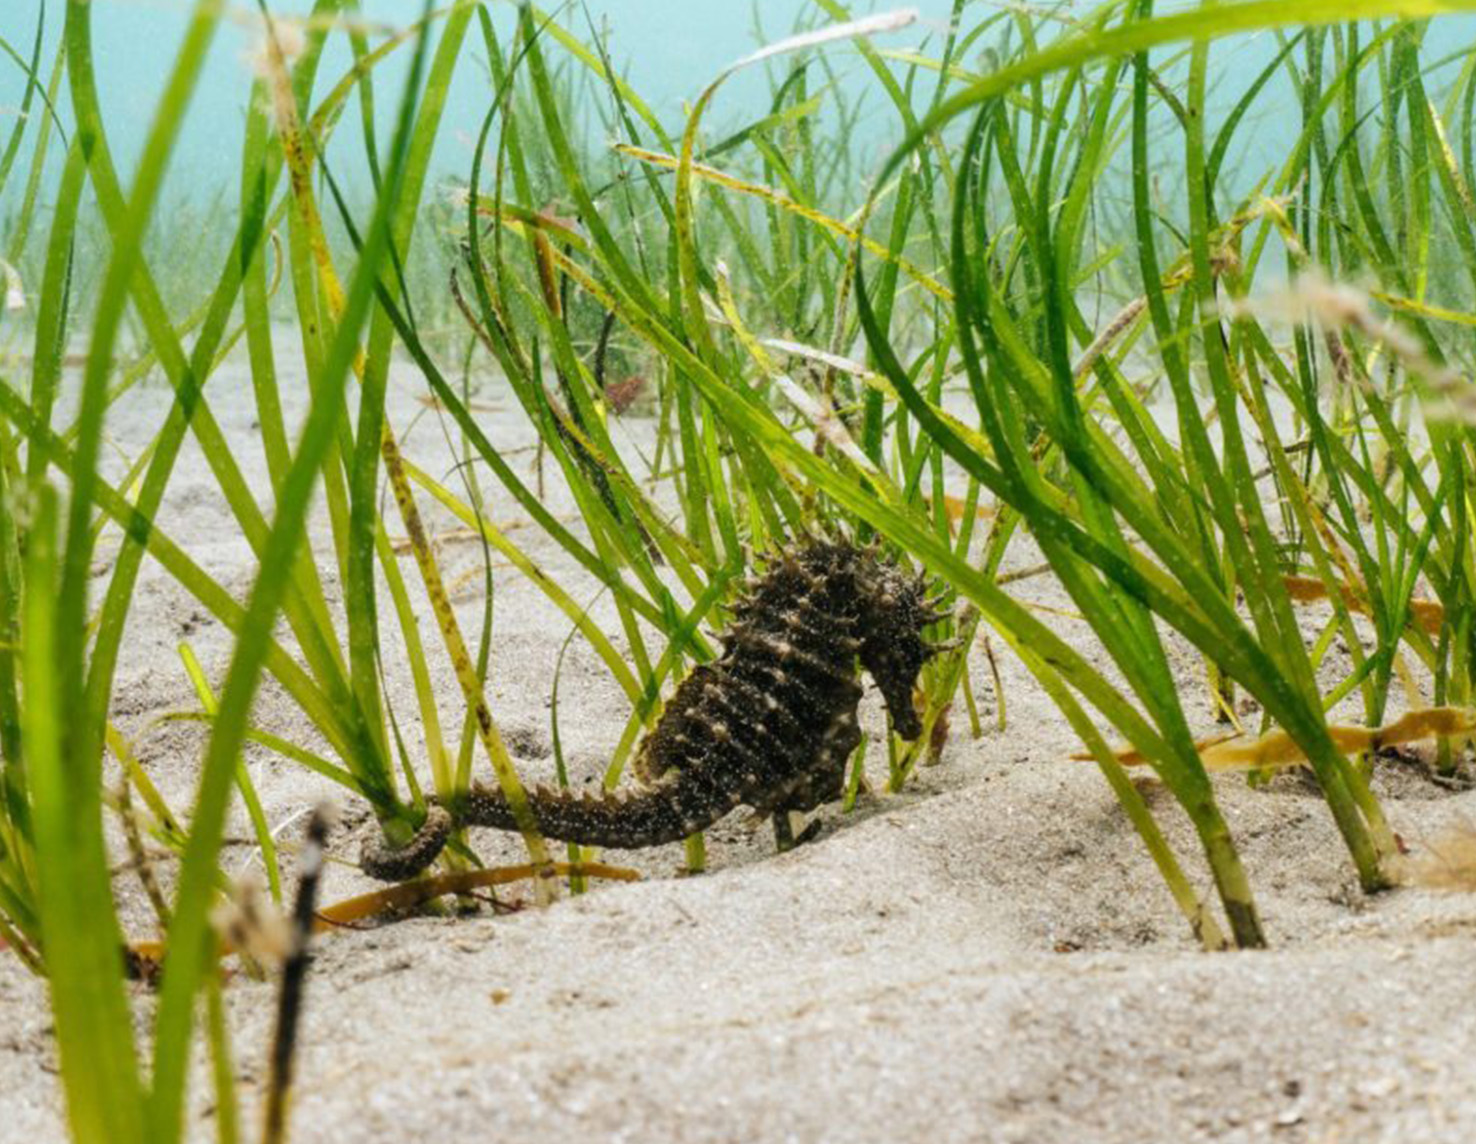 Seahorse in seagrass